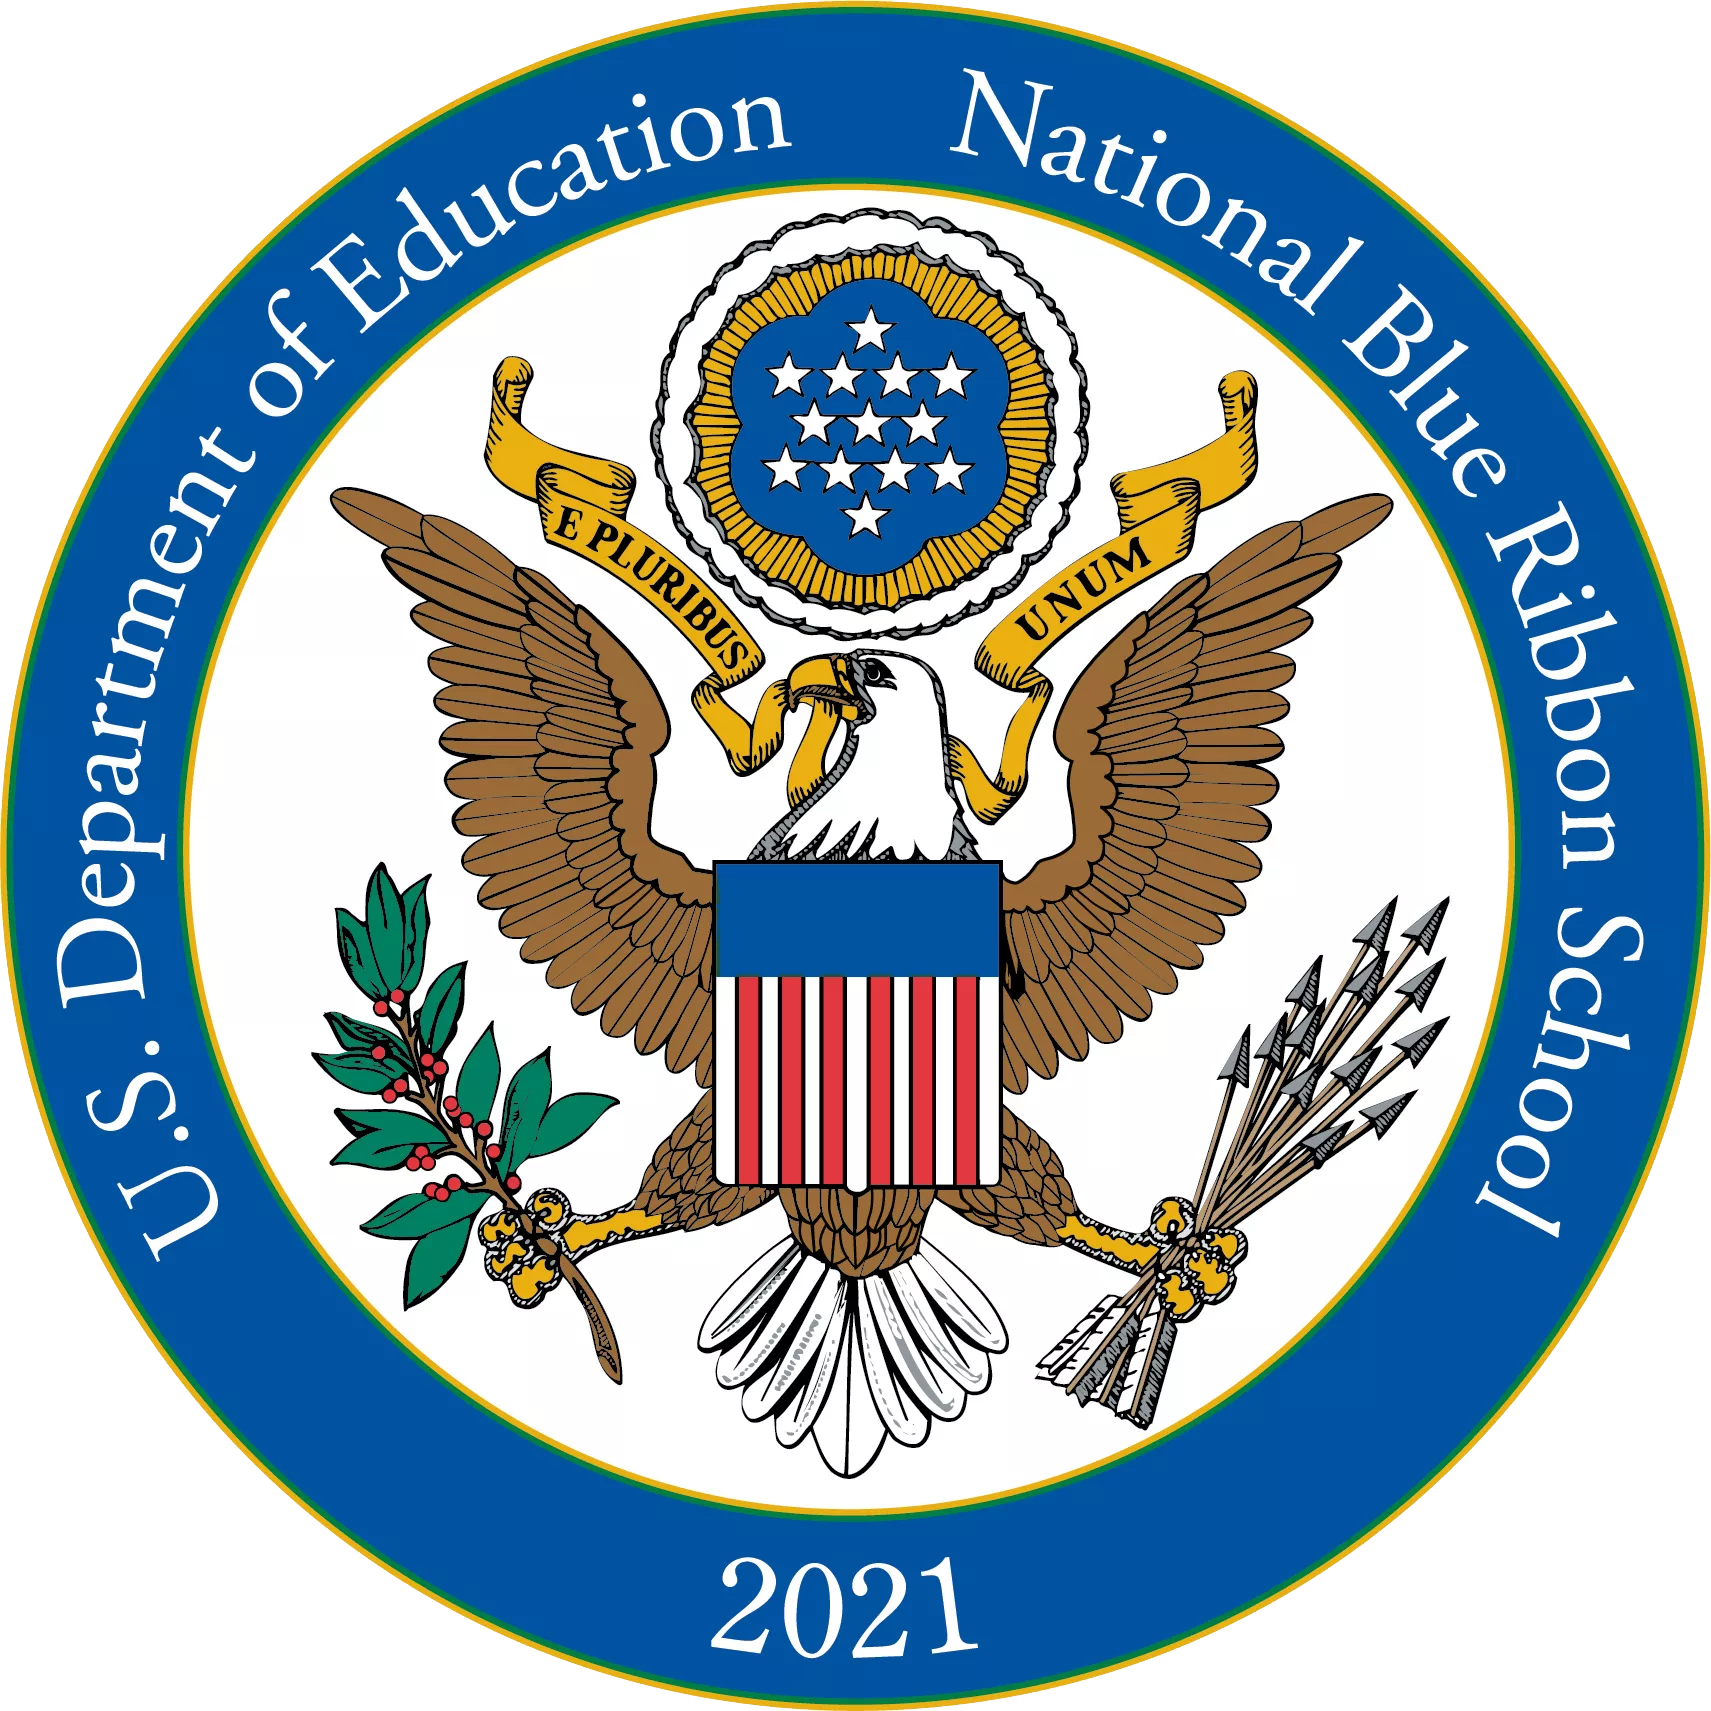 National Blue Ribbon Schools Program Logo - Students exit school after another great day at the 